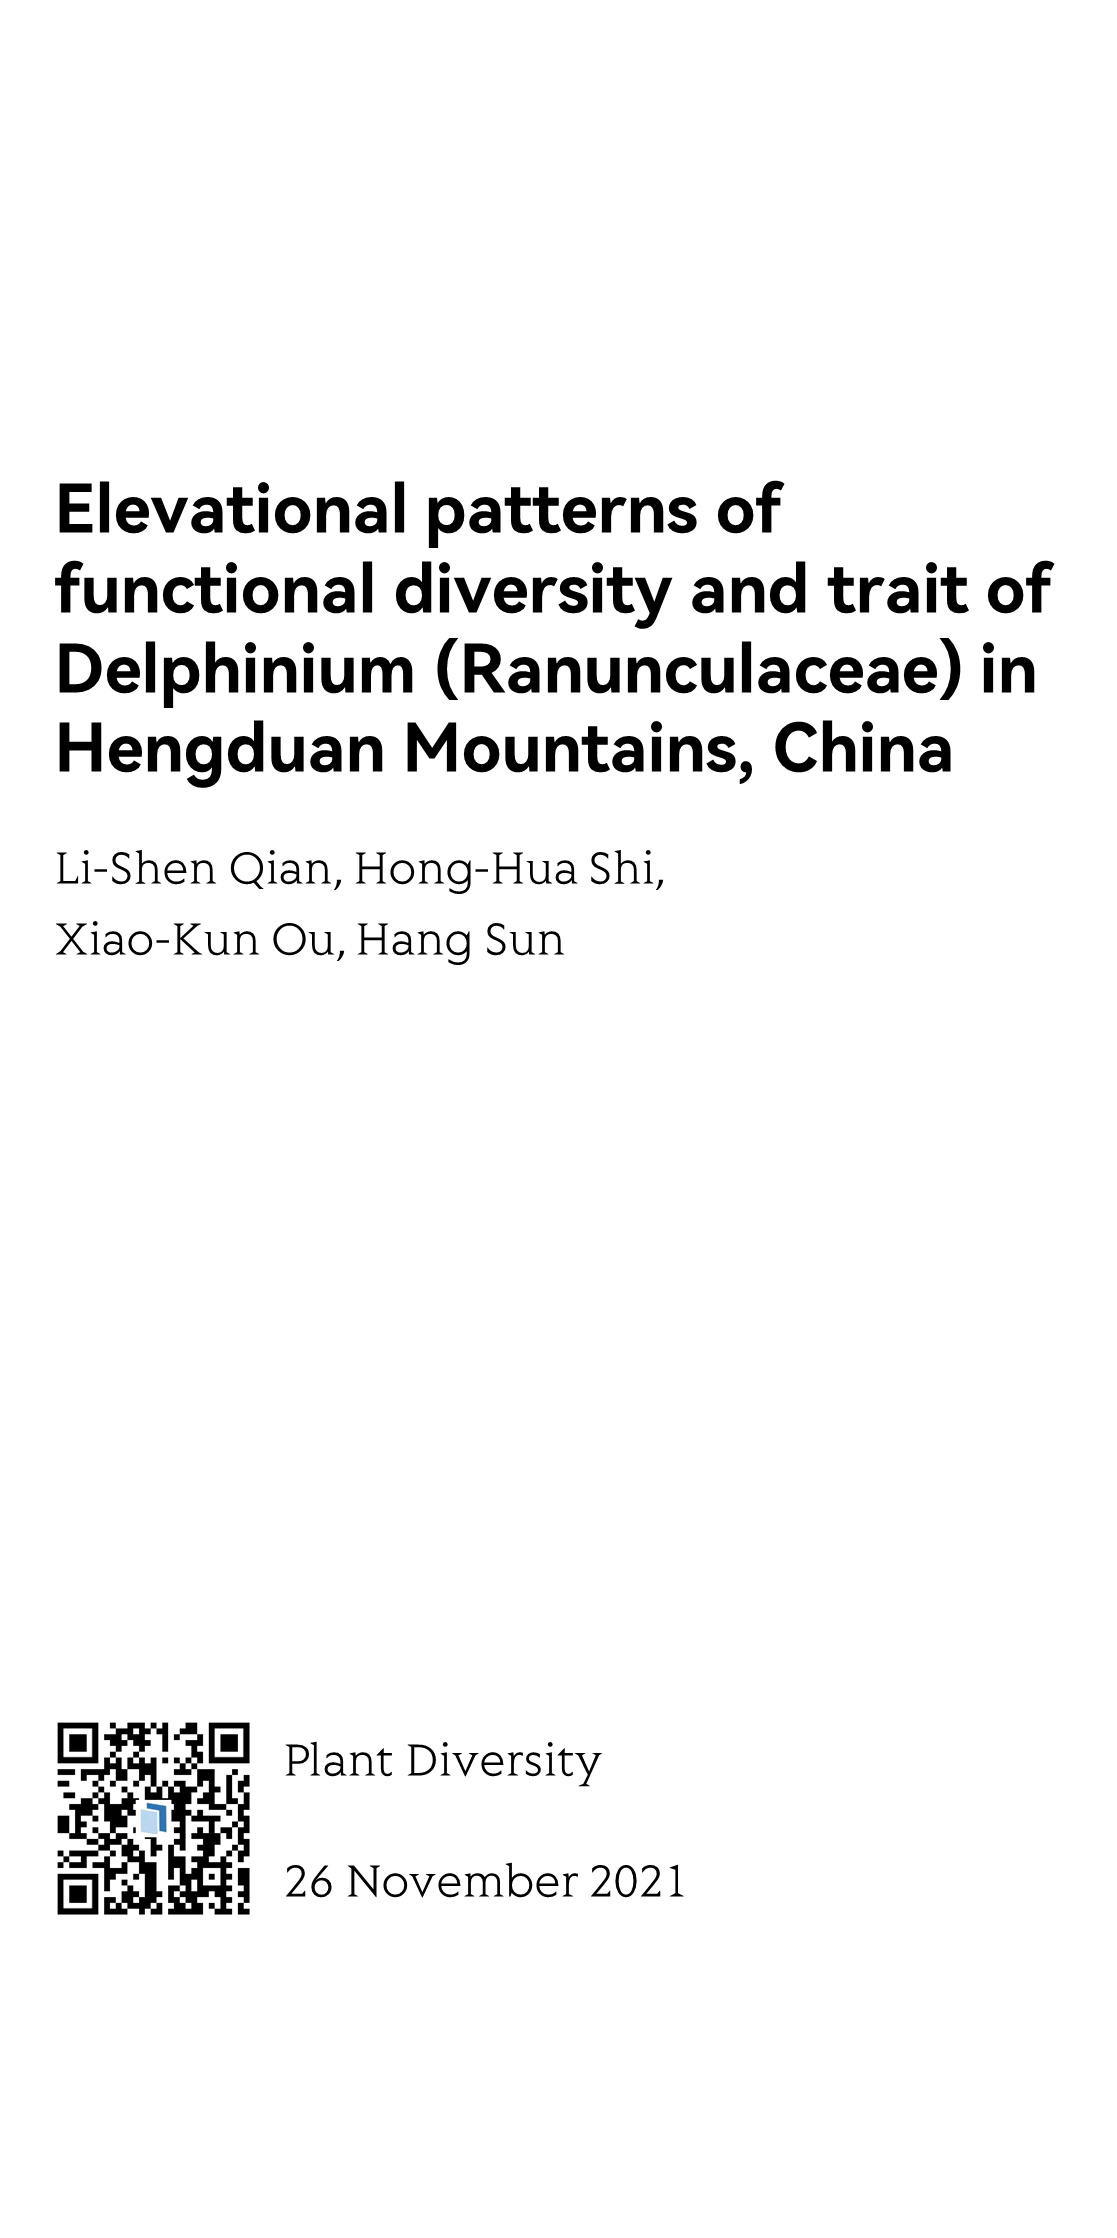 Elevational patterns of functional diversity and trait of Delphinium (Ranunculaceae) in Hengduan Mountains, China_1